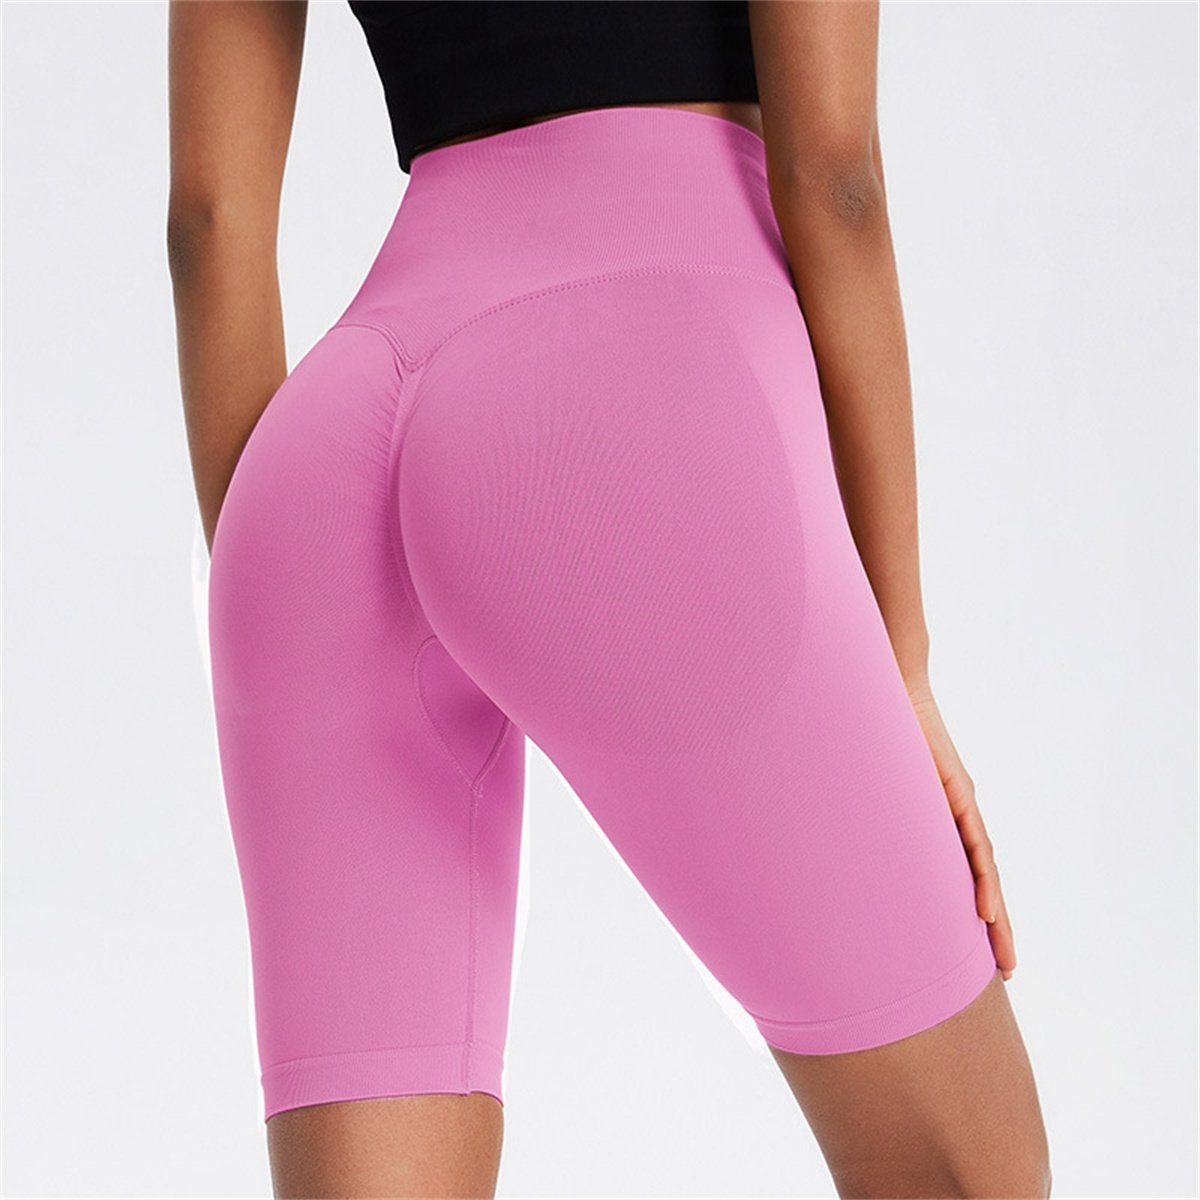 mit carefully Damen-Fitness-Po-Lifting-Yoga-Shorts selected Taille hoher Yogatights rosa